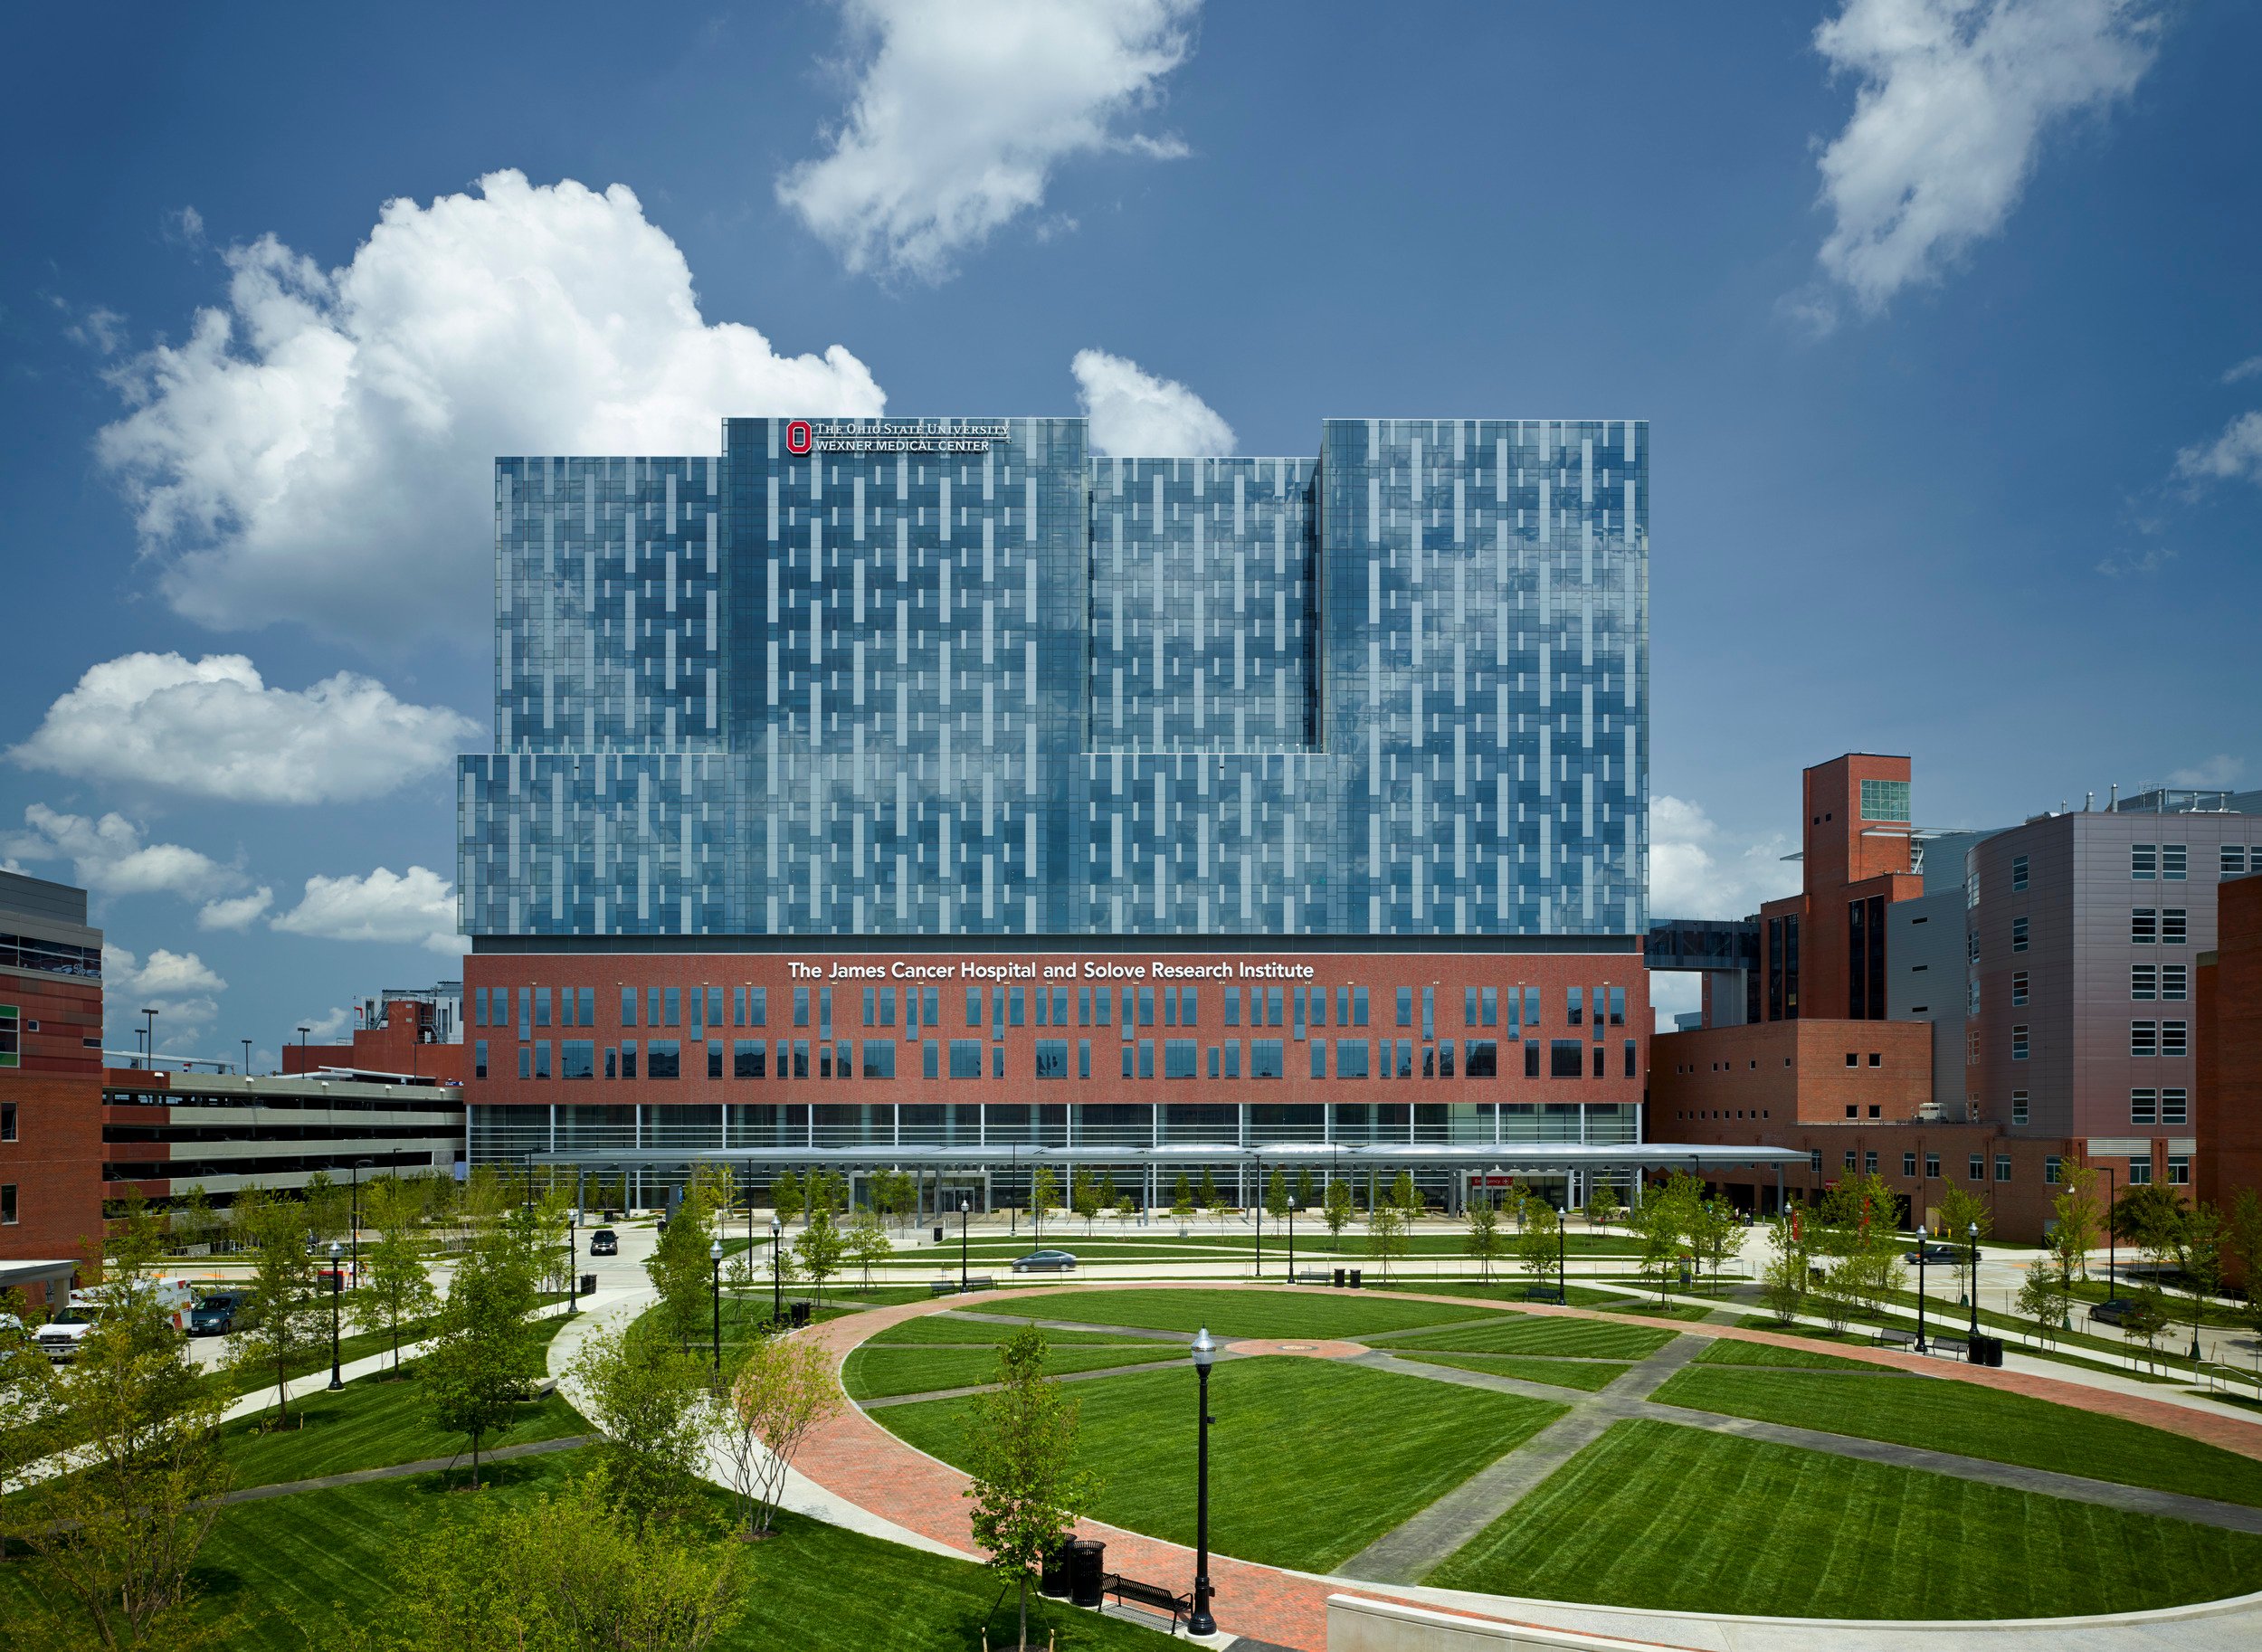 James Cancer Hospital and Solove Research Institute image